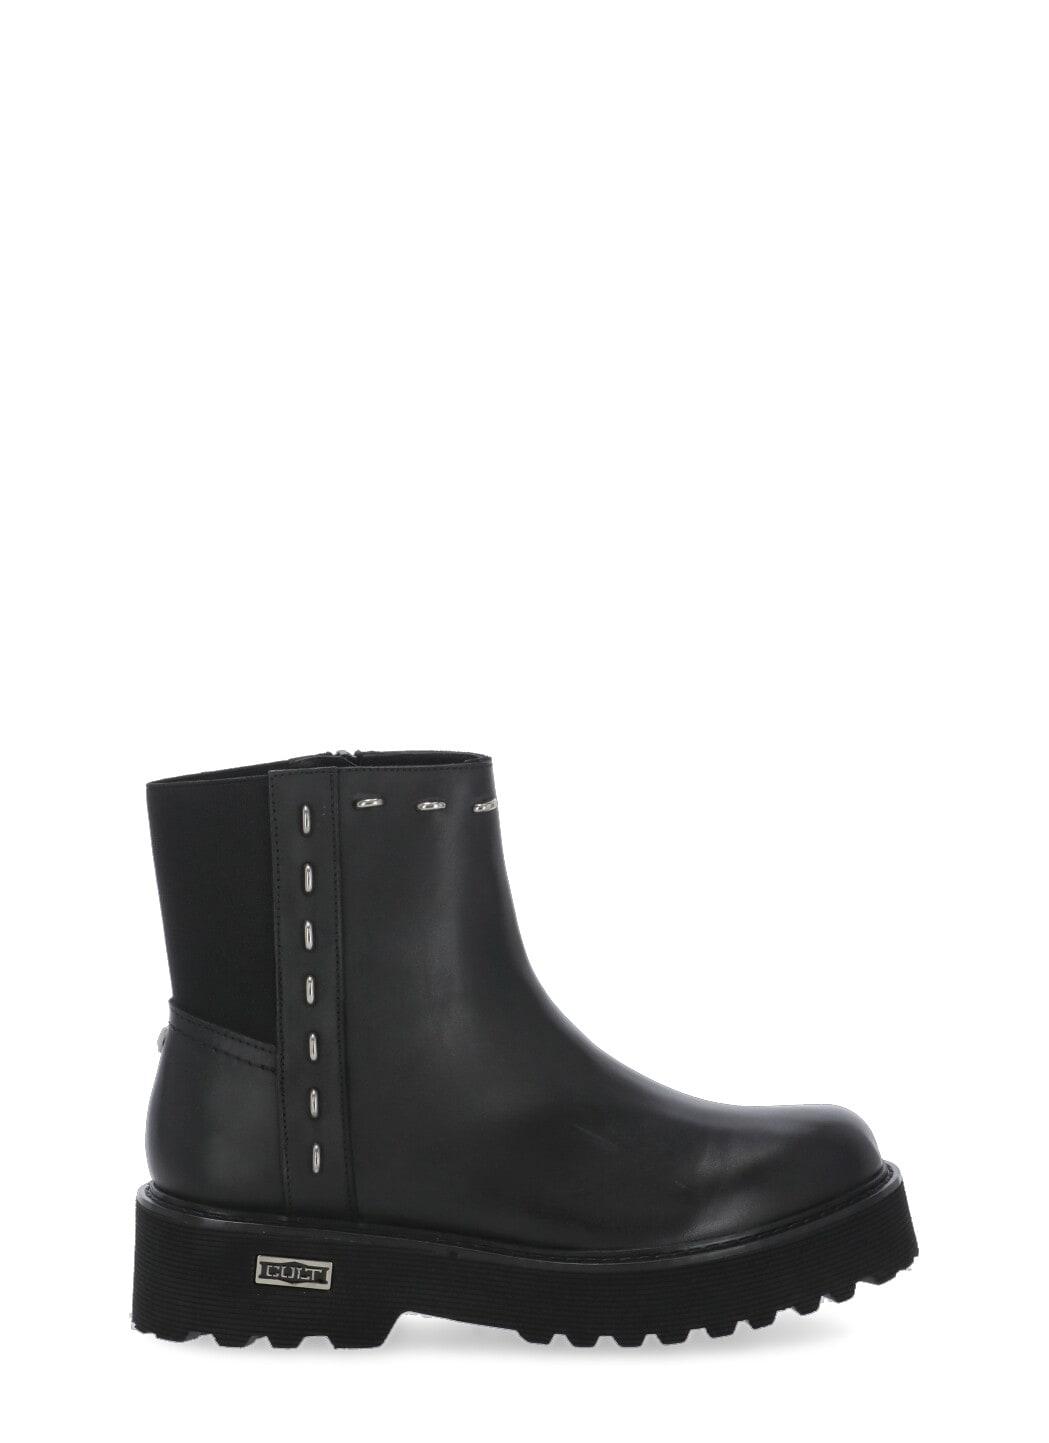 Cult Slash 3495 Chelsea Boots in Black | Lyst